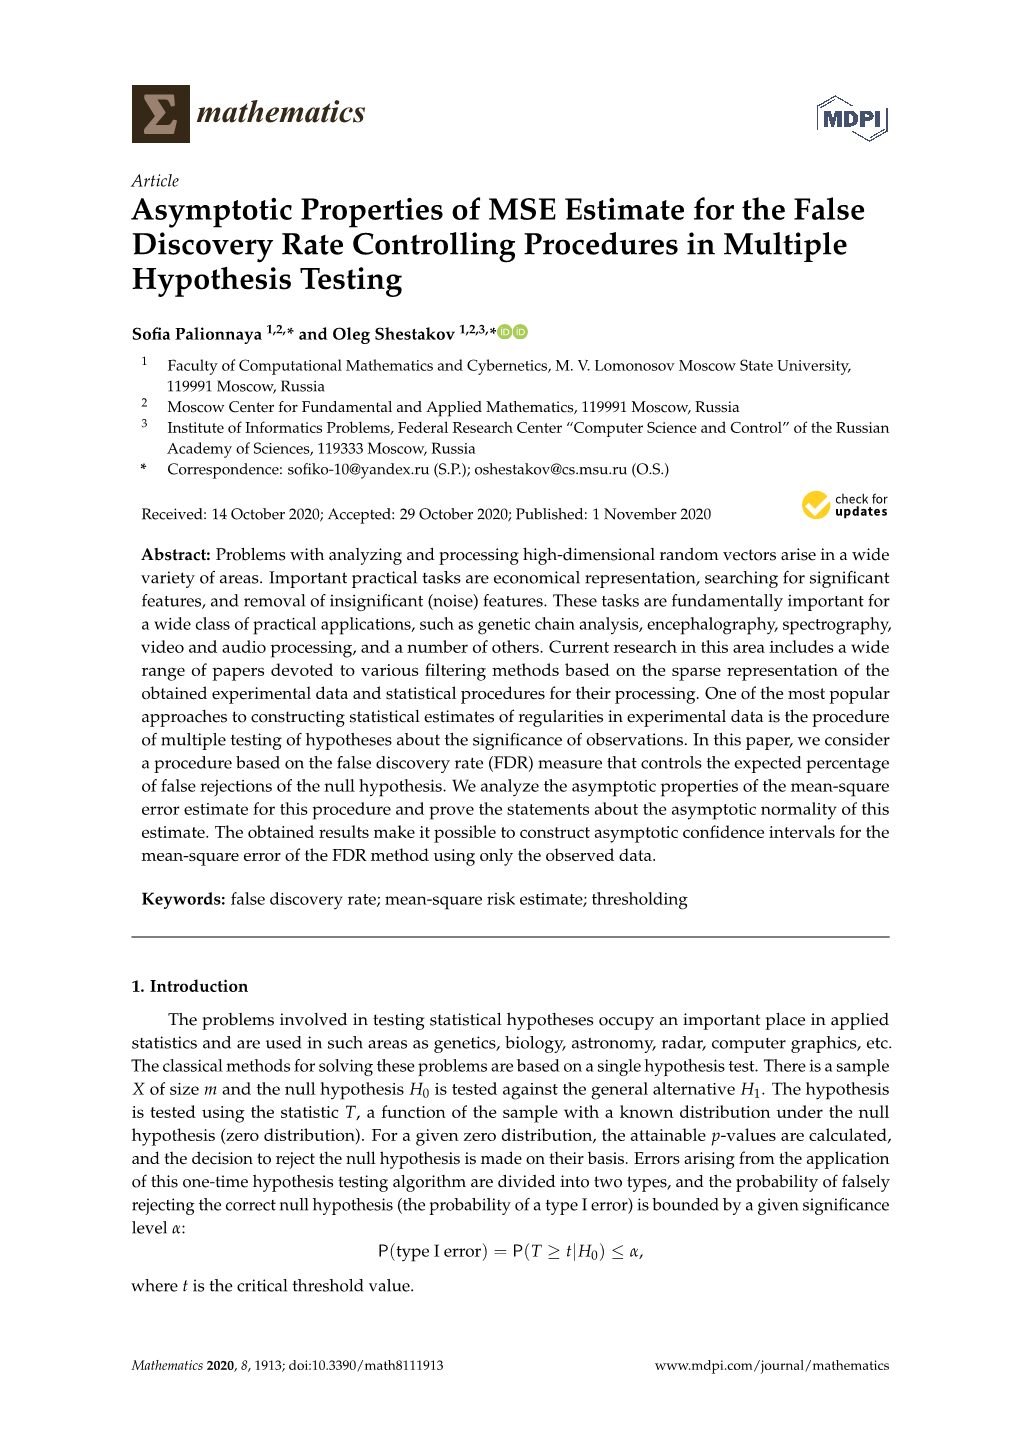 Asymptotic Properties of MSE Estimate for the False Discovery Rate Controlling Procedures in Multiple Hypothesis Testing